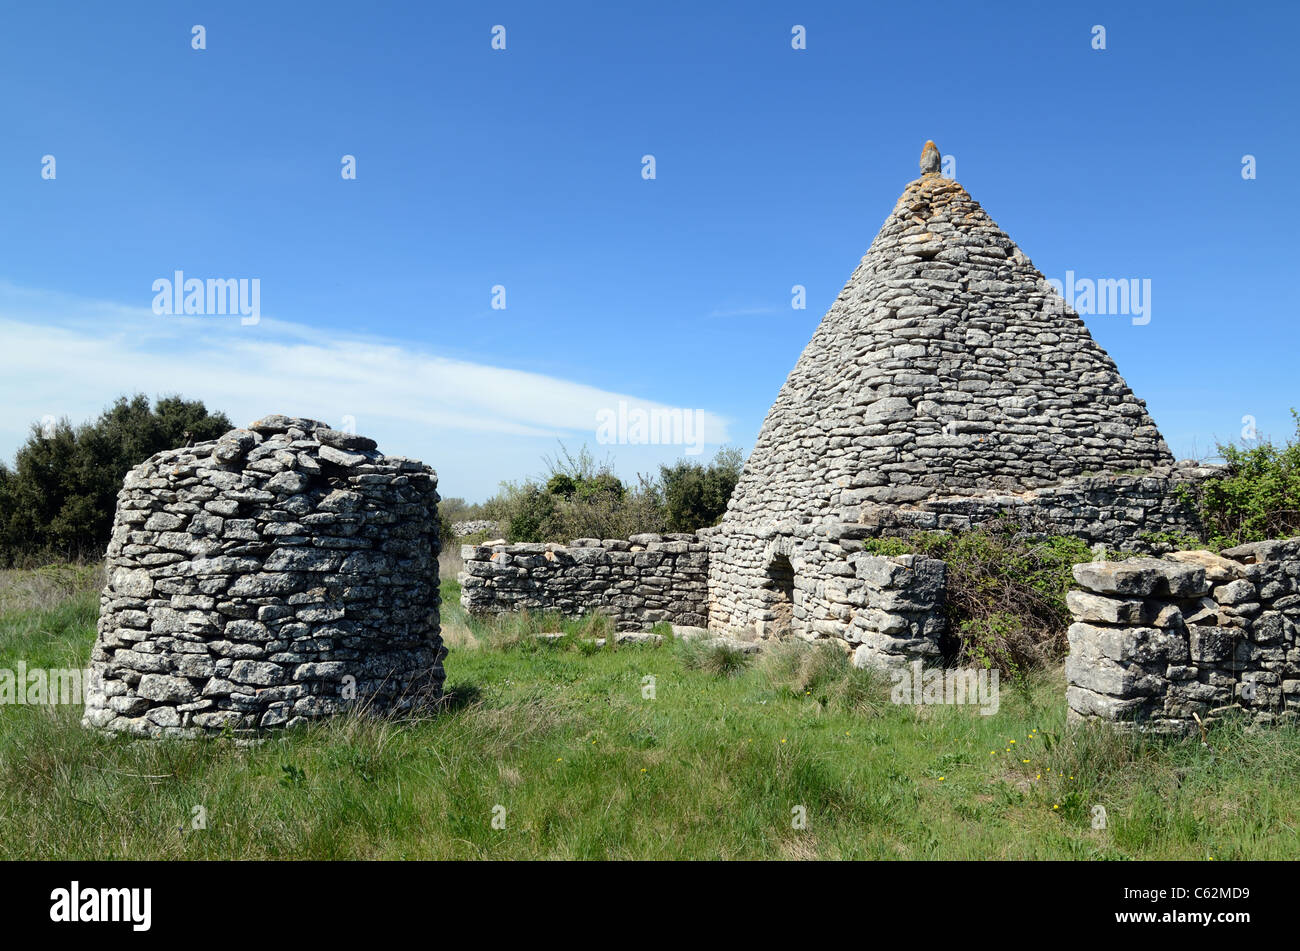 Stone Borie, Dry-Stone Construction or Gallic Hut and Stone Water Well, near Apt, Luberon, Provence, France Stock Photo